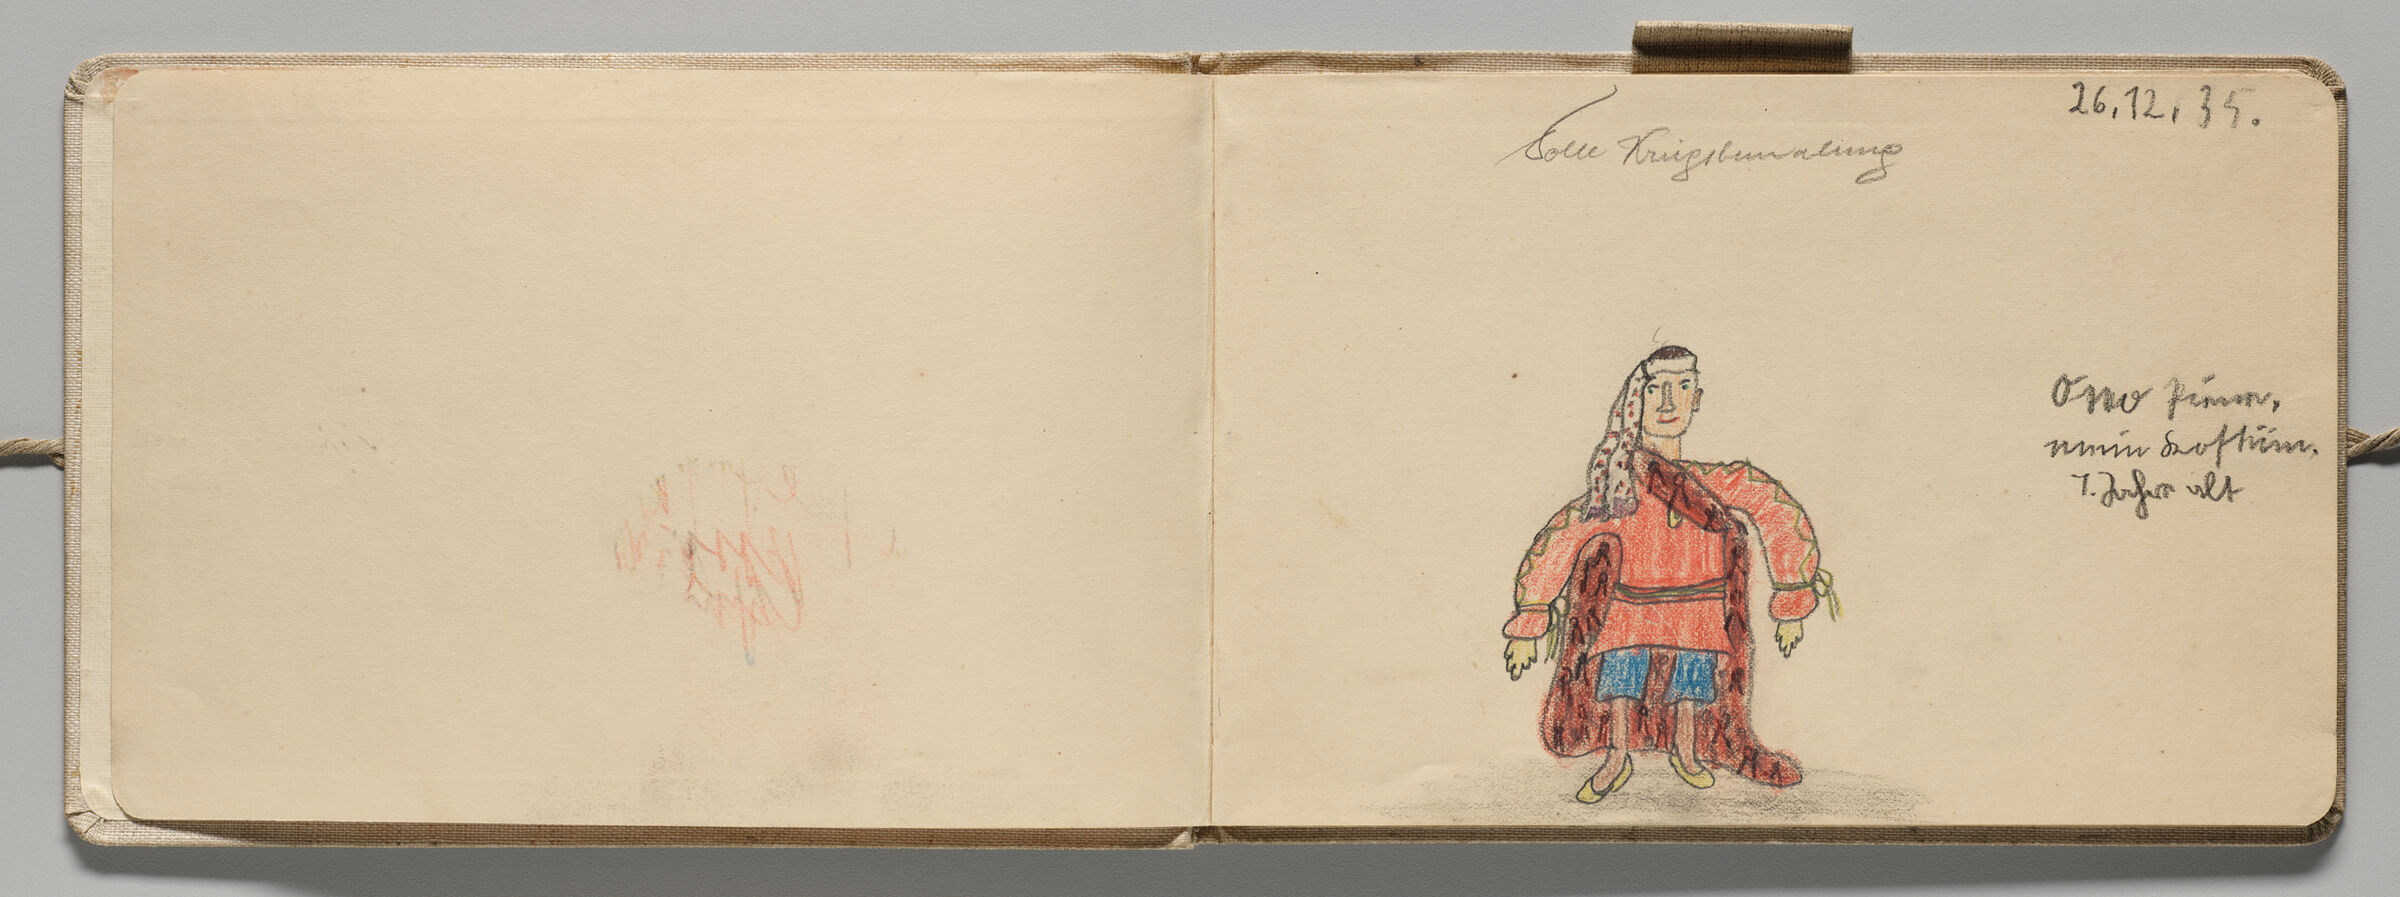 Untitled (Blank With Pigment Trace, Left Page); Untitled (Self-Portrait In Costume, Age 7, Right Page)